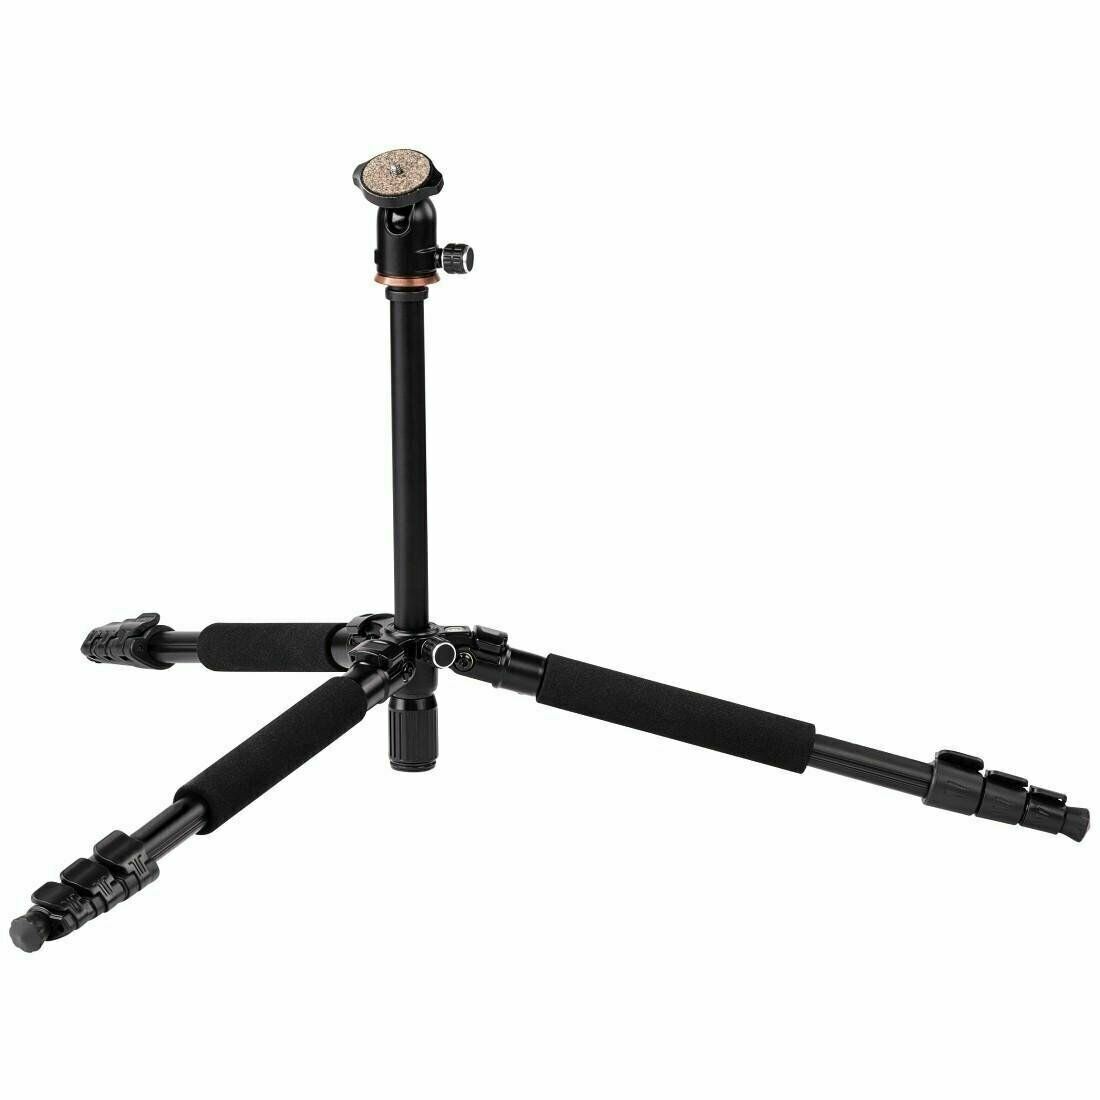 Hama Traveller compact photography Tripod with ball head 117cm 46" With Case